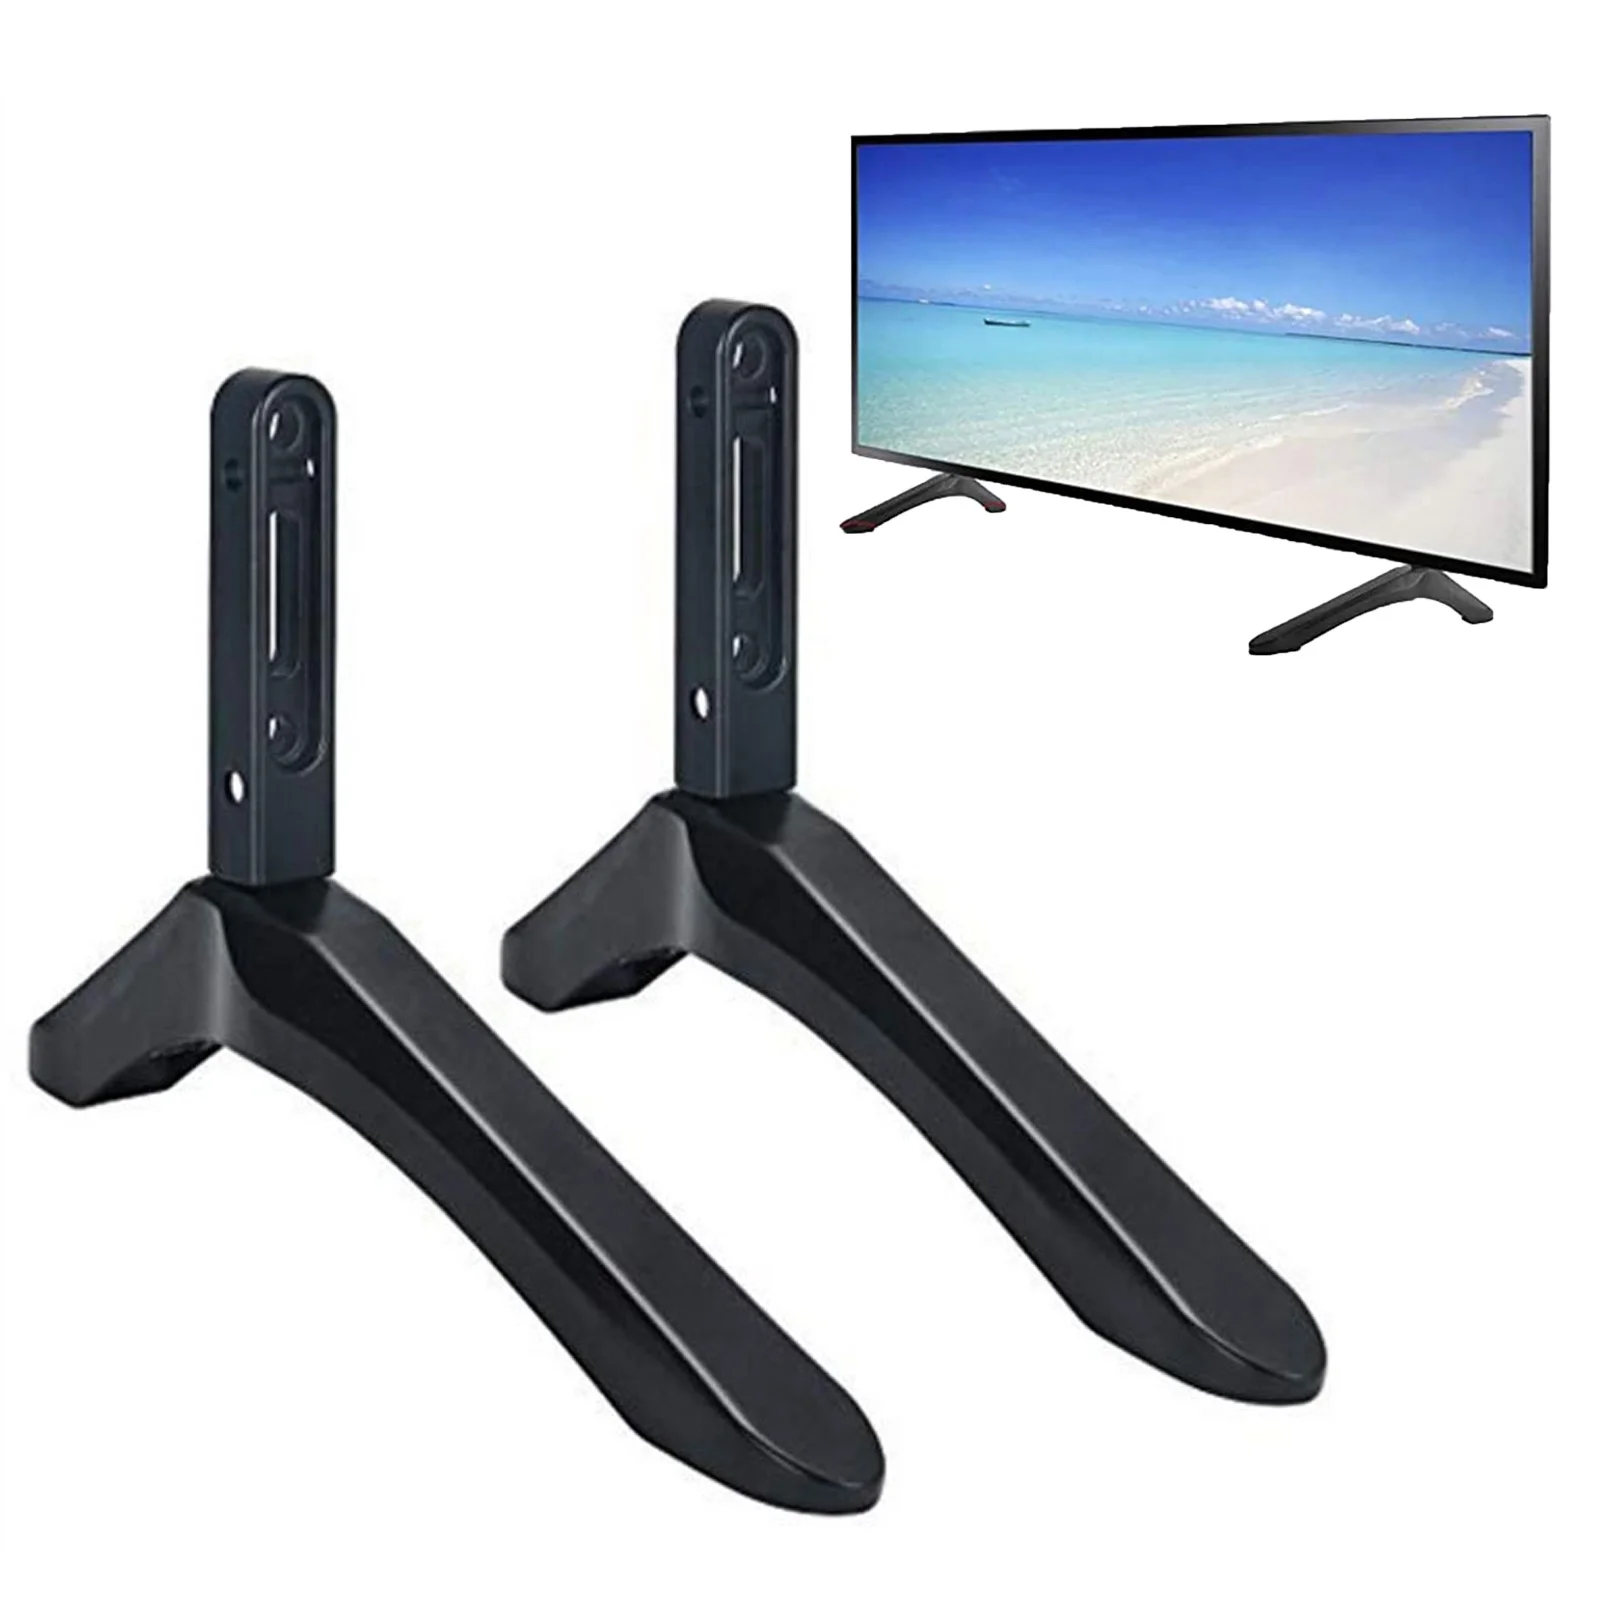 

Universal TV Base Pedestal Feet TV Stand Mount TV Legs for Most Televisions with Mounting Hole Distance from 2cm-5cm Home Use